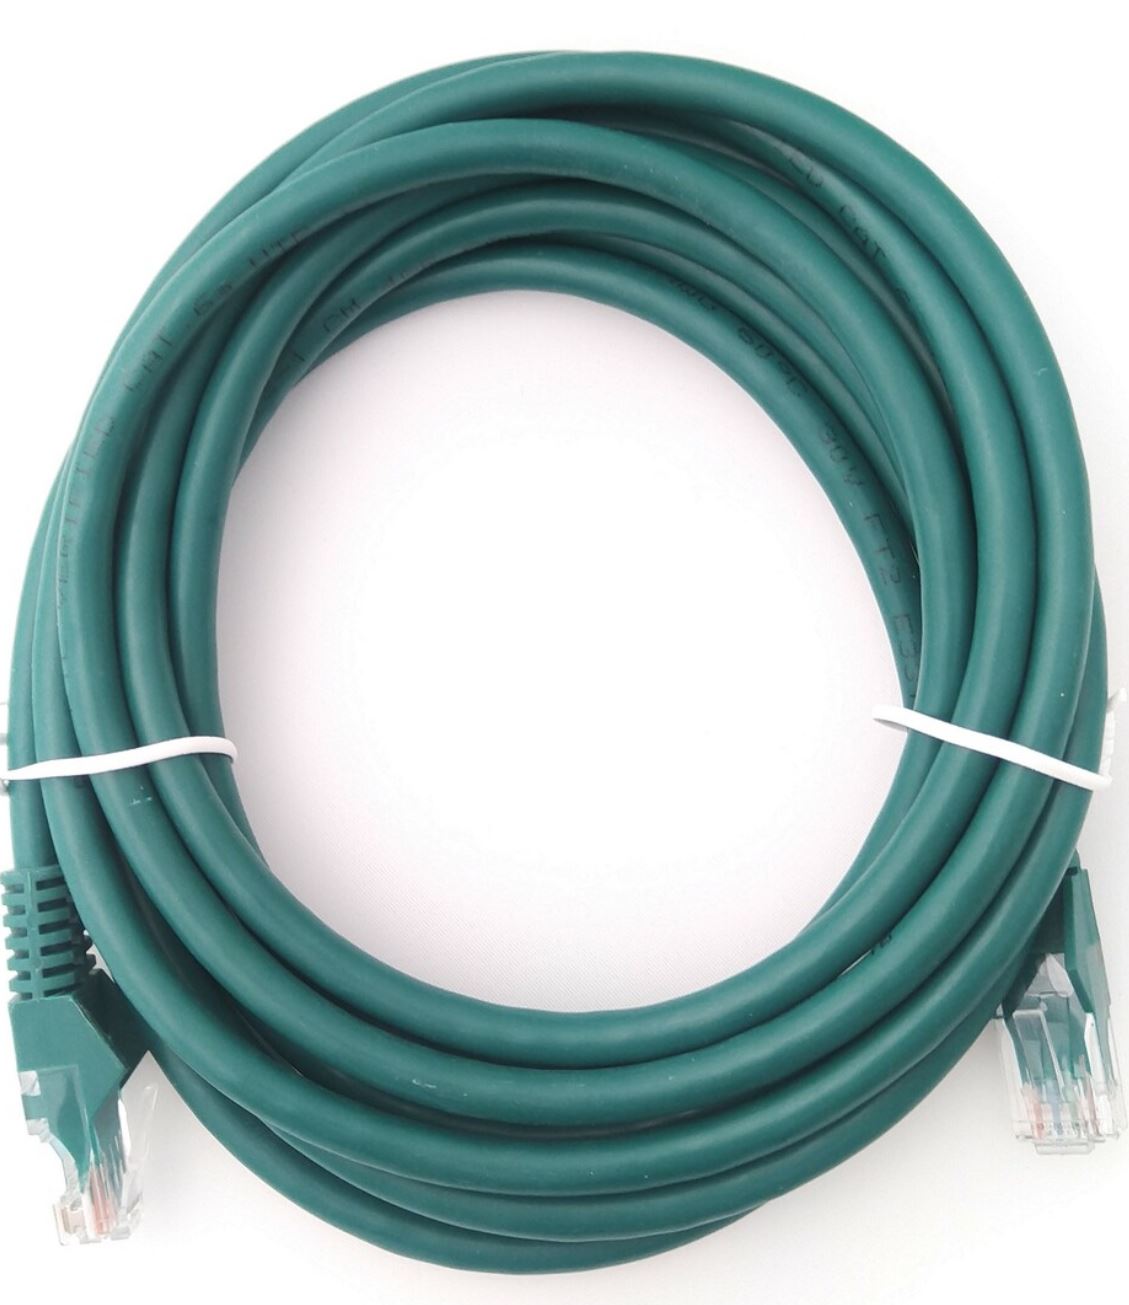 0.5m UTP Ethernet Cable (Green, Cat 6A)